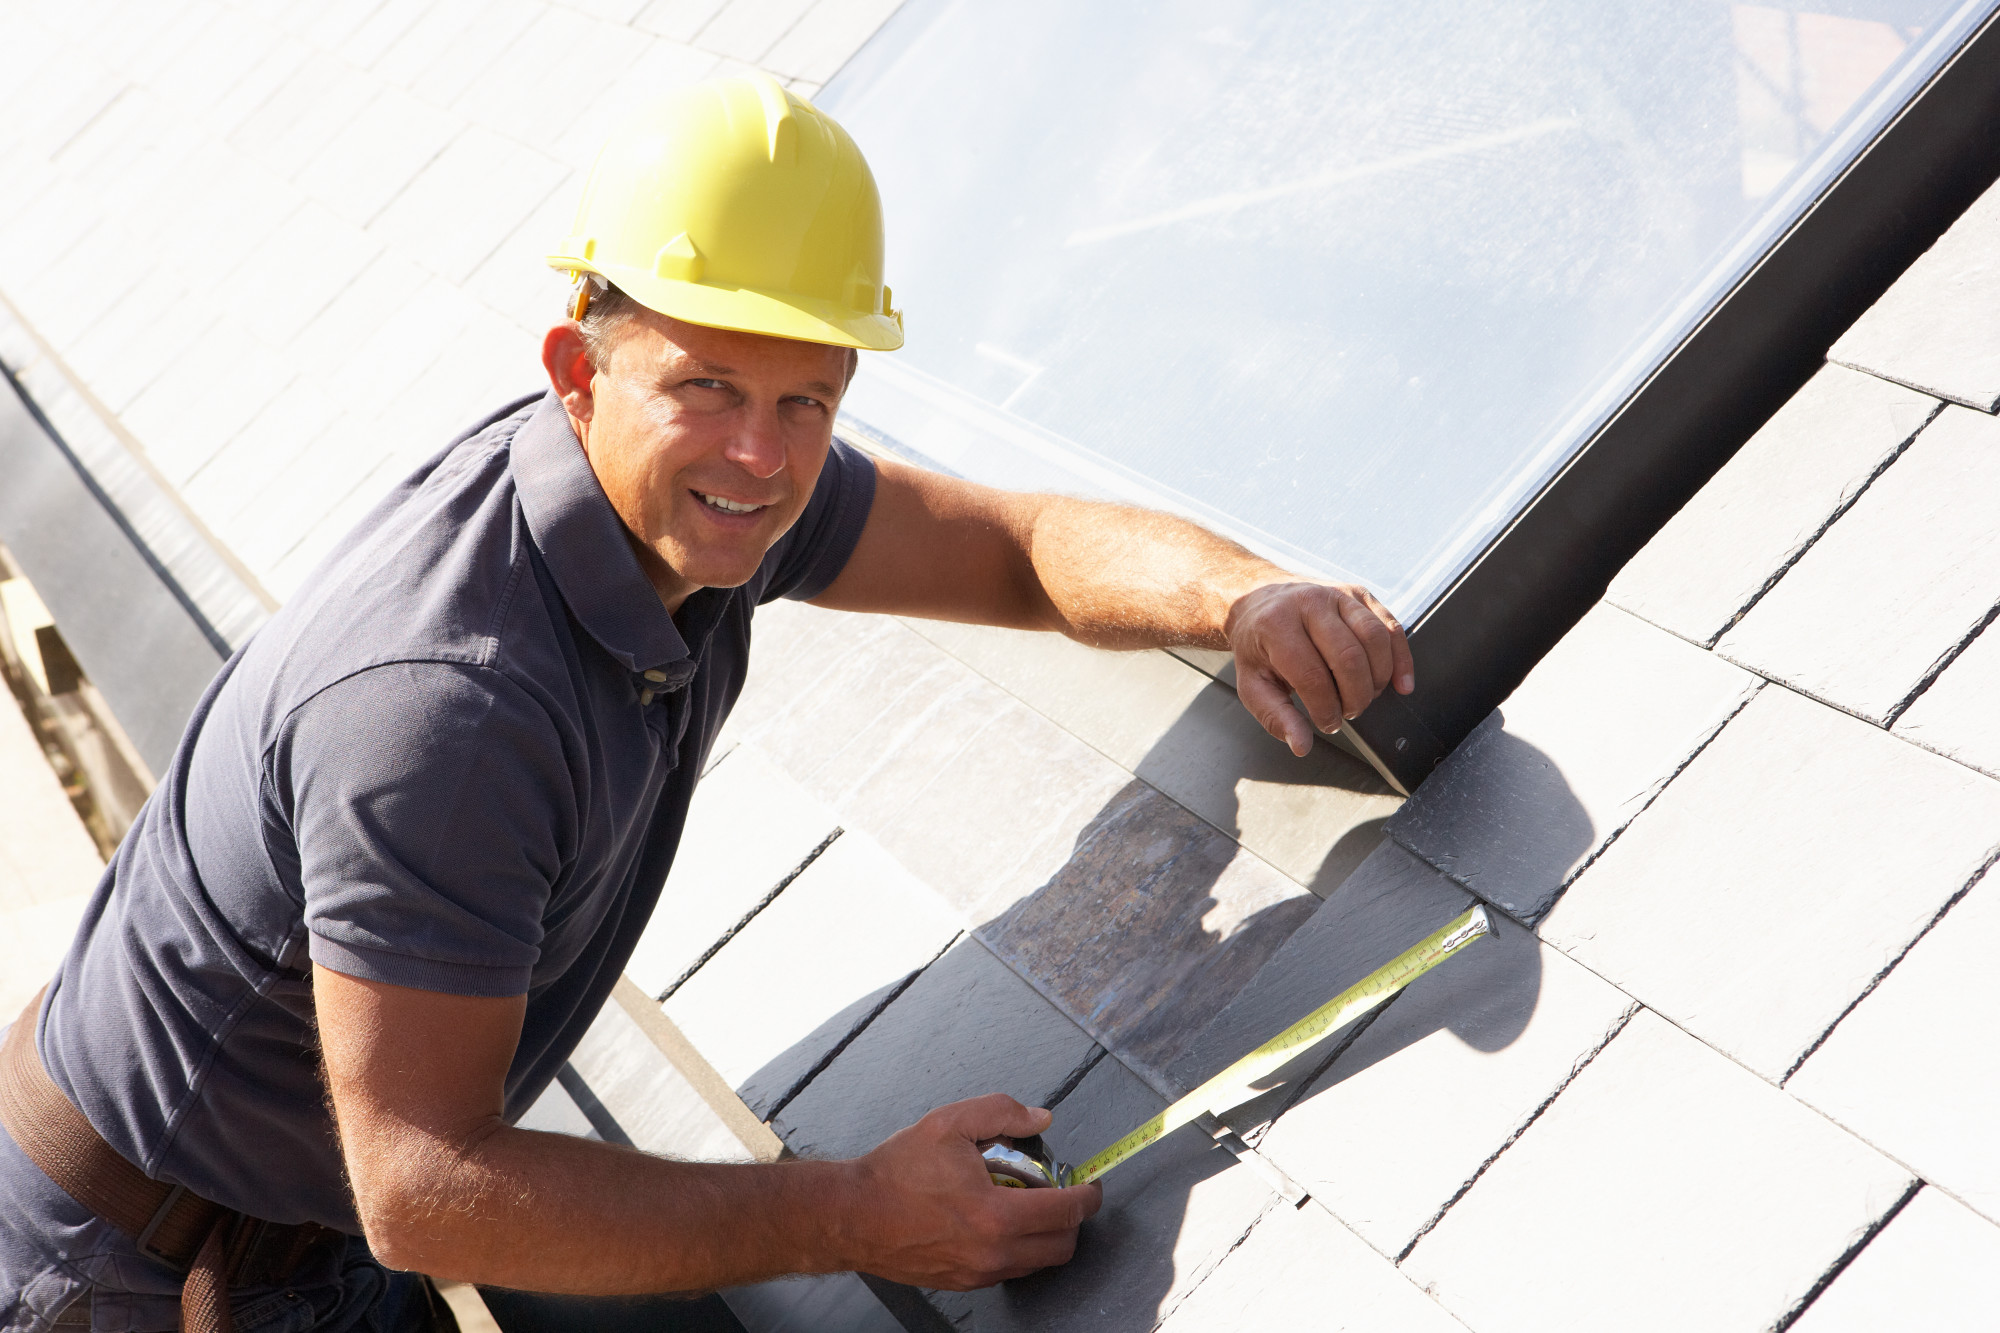 Are you wondering how to hire a roofing contractor you can count on? Click here for five telltale signs of a quality roofing contractor.